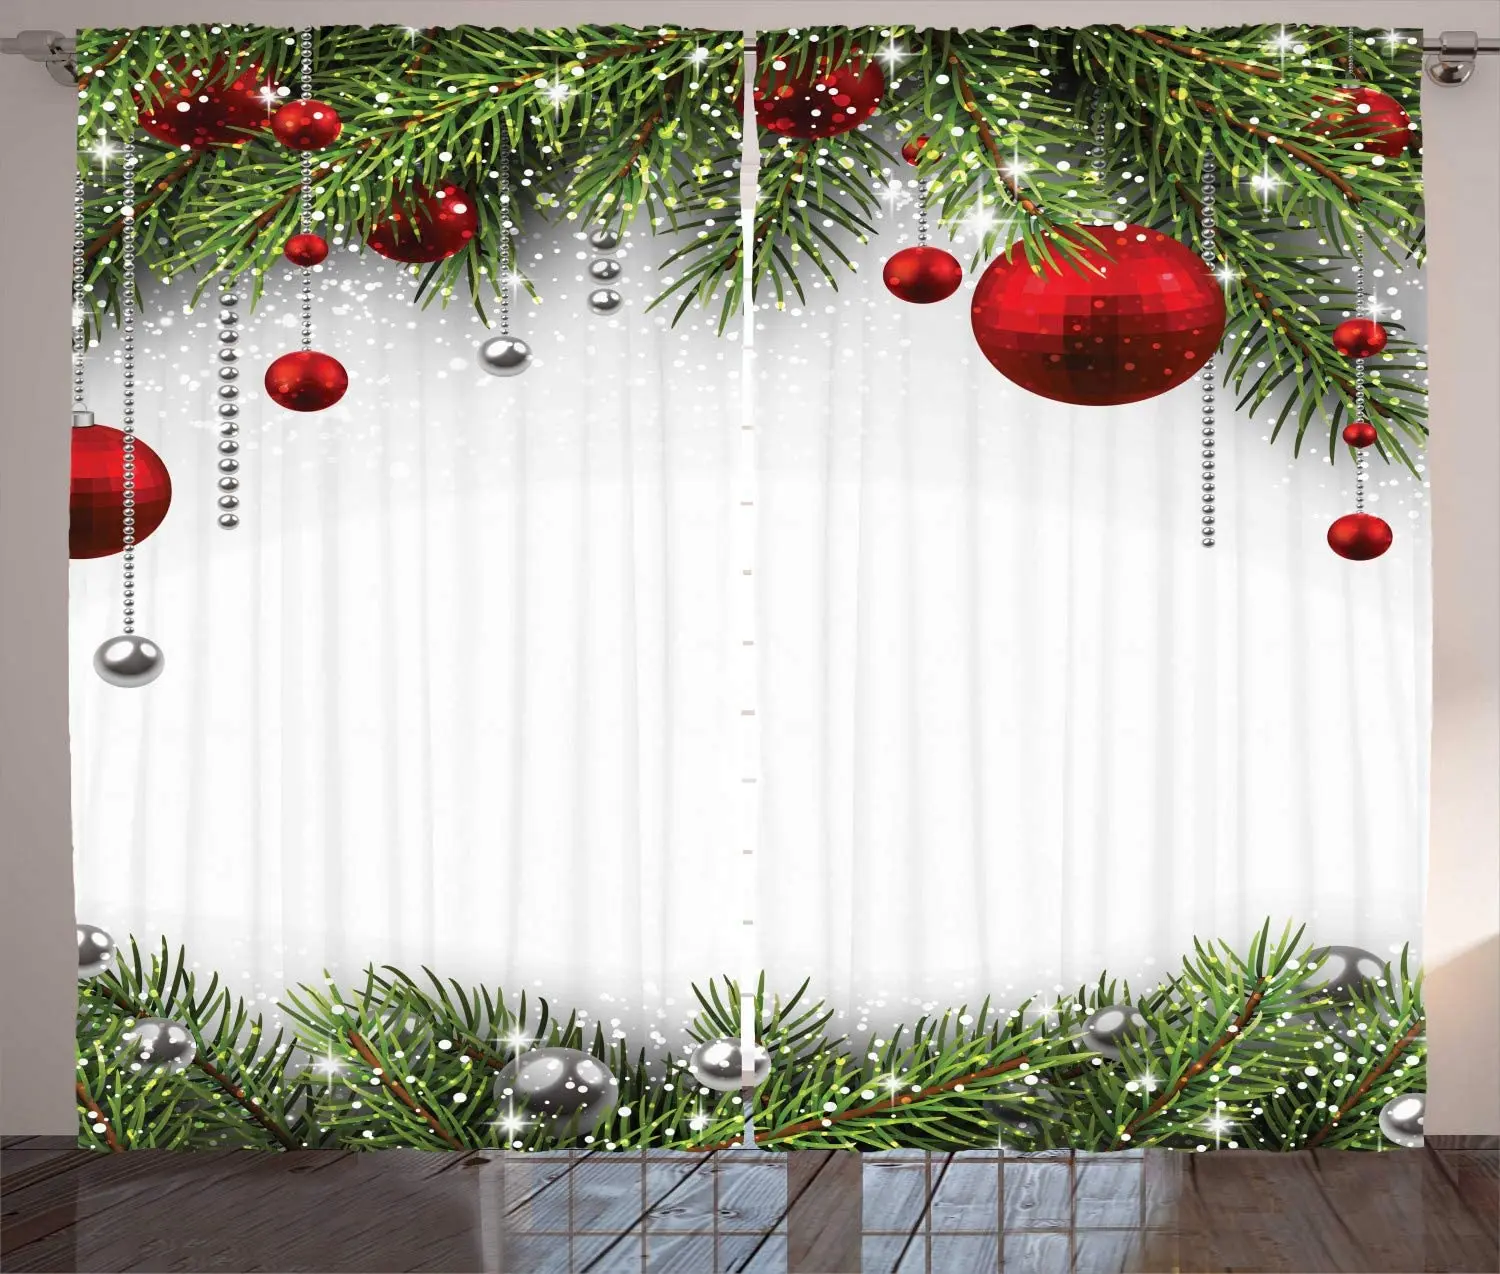 2 Sets of Holiday CHRISTMAS CURTAINS poinsettia pomegranate pinecone 43" x 86" 